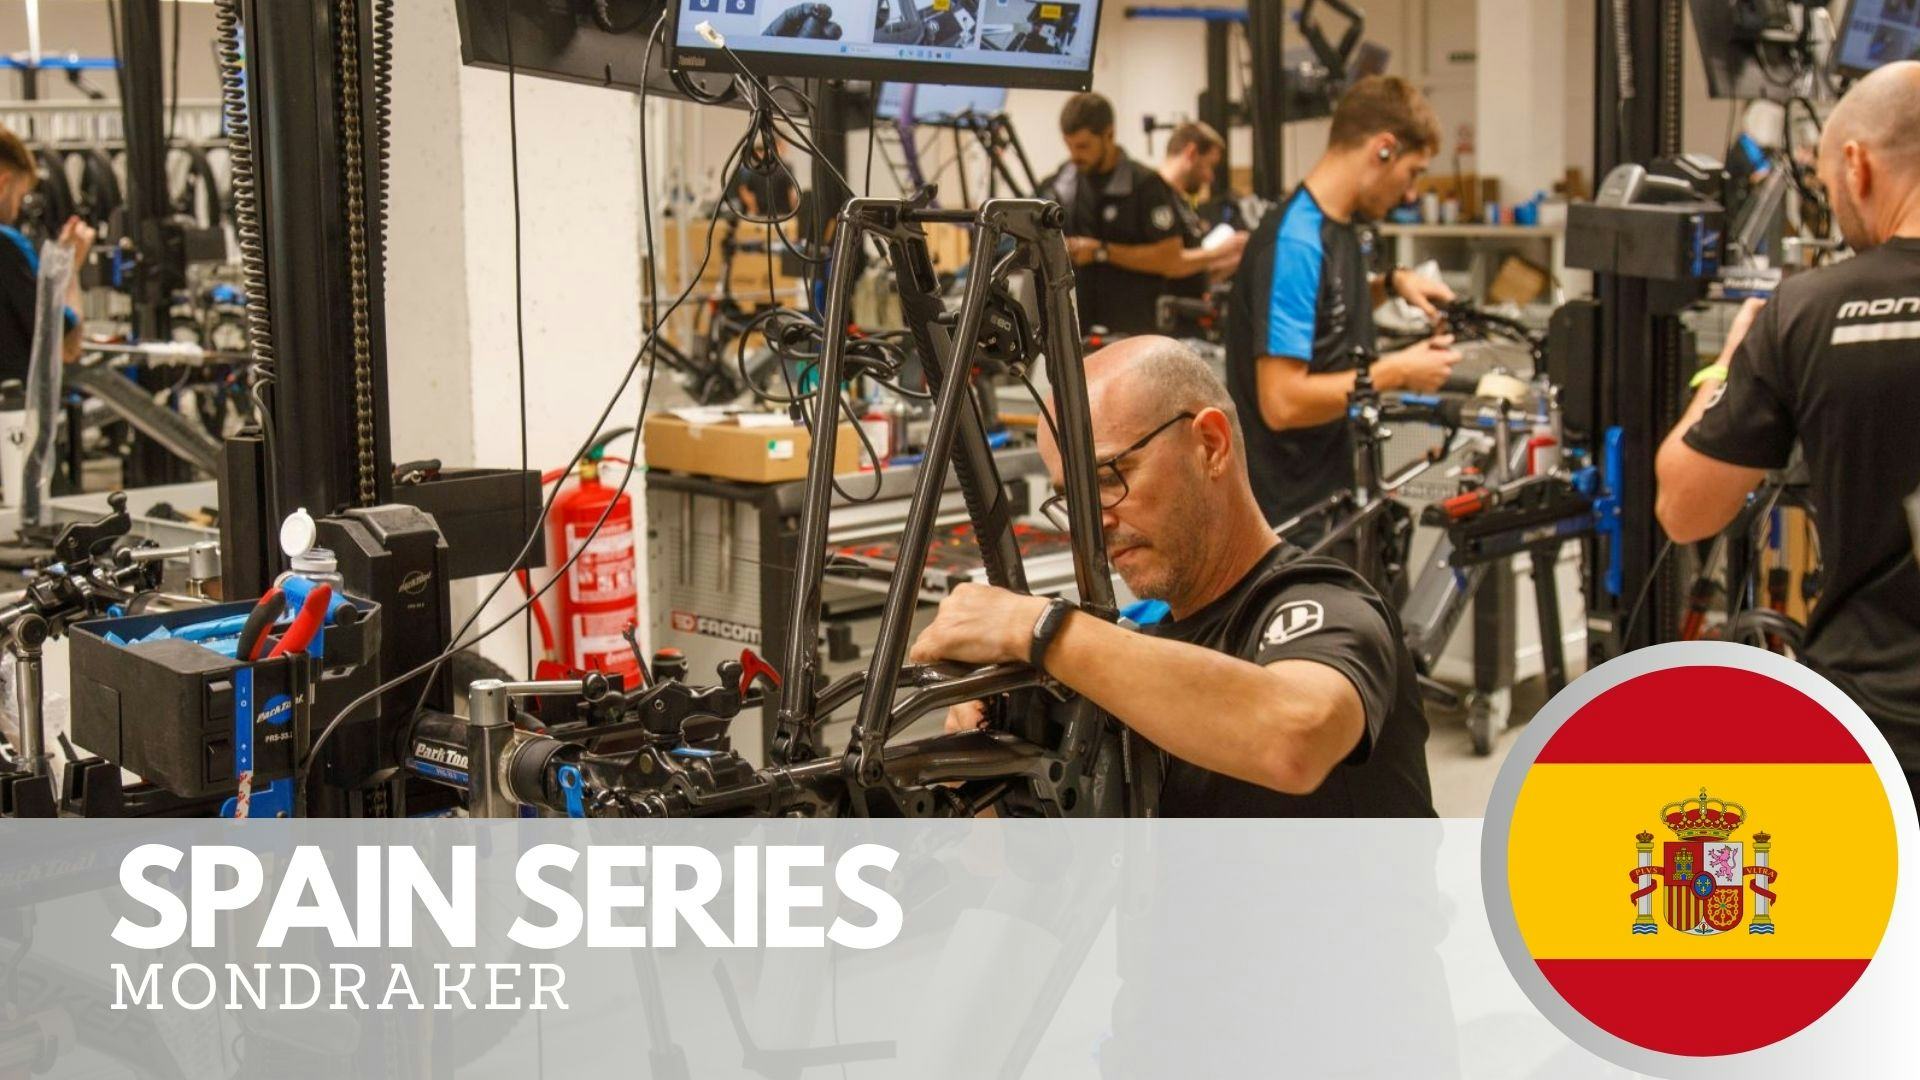 All Mondraker bikes are assembled on single workstations by hand at the company headquarters in Elche. - Photos Dieter Wertz